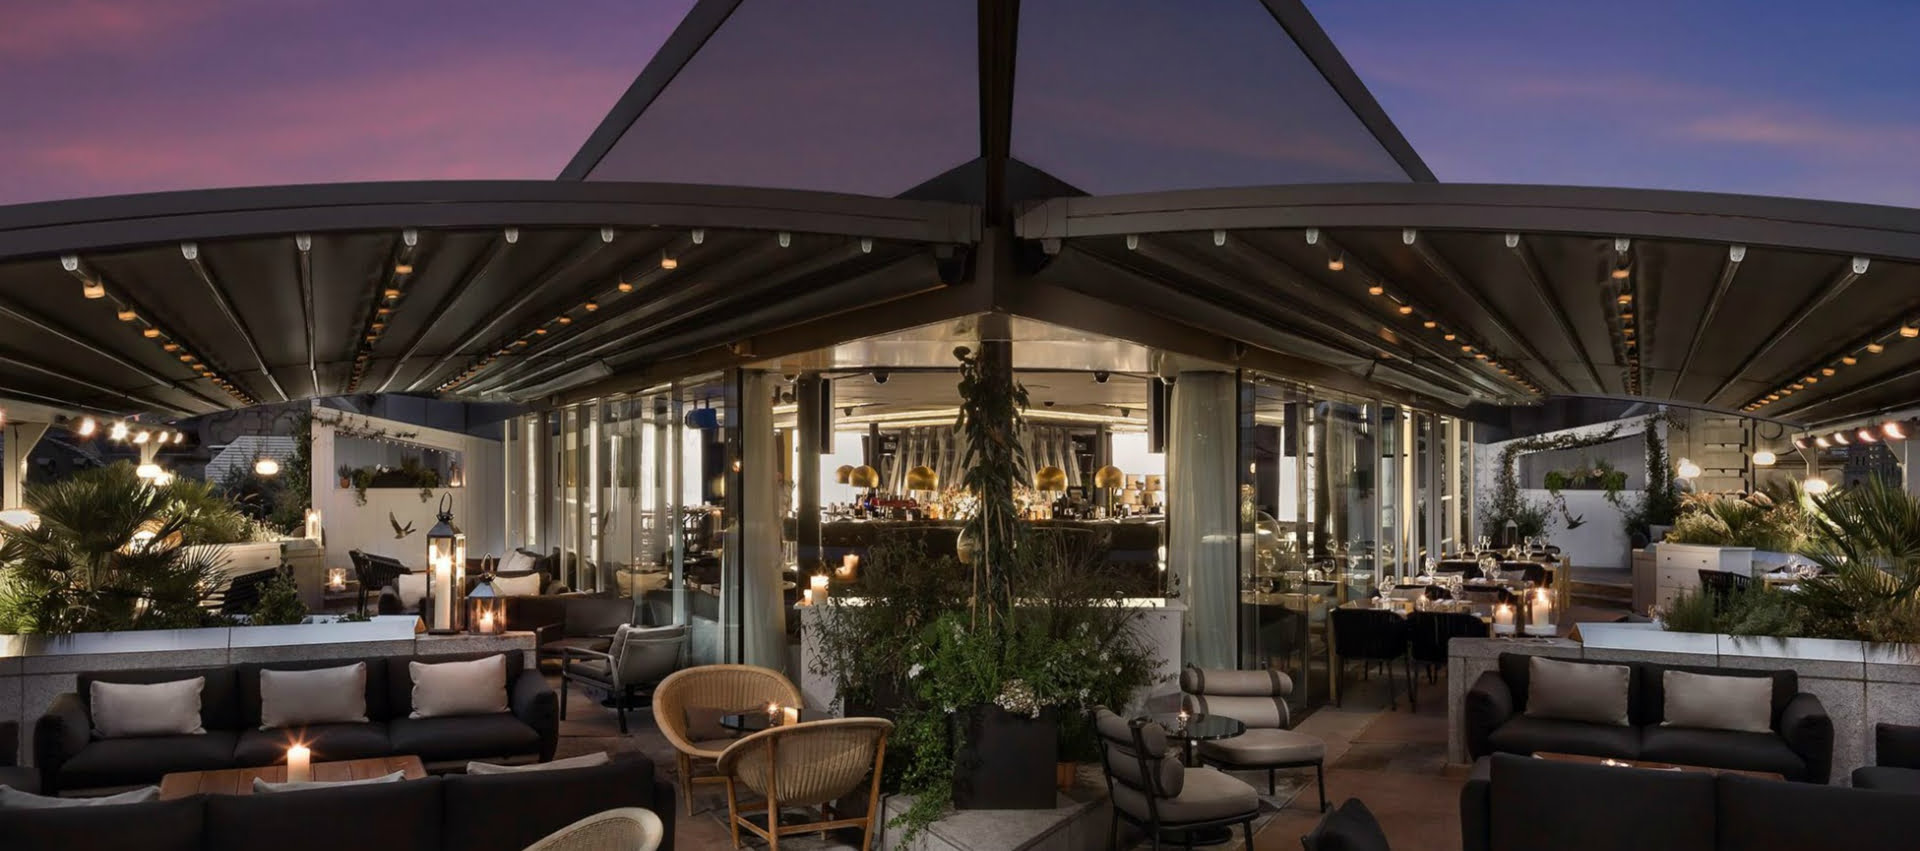 20 HQ Pictures Top 10 Rooftop Bars London : 29 Best Rooftop Bars With Dazzling Views In London